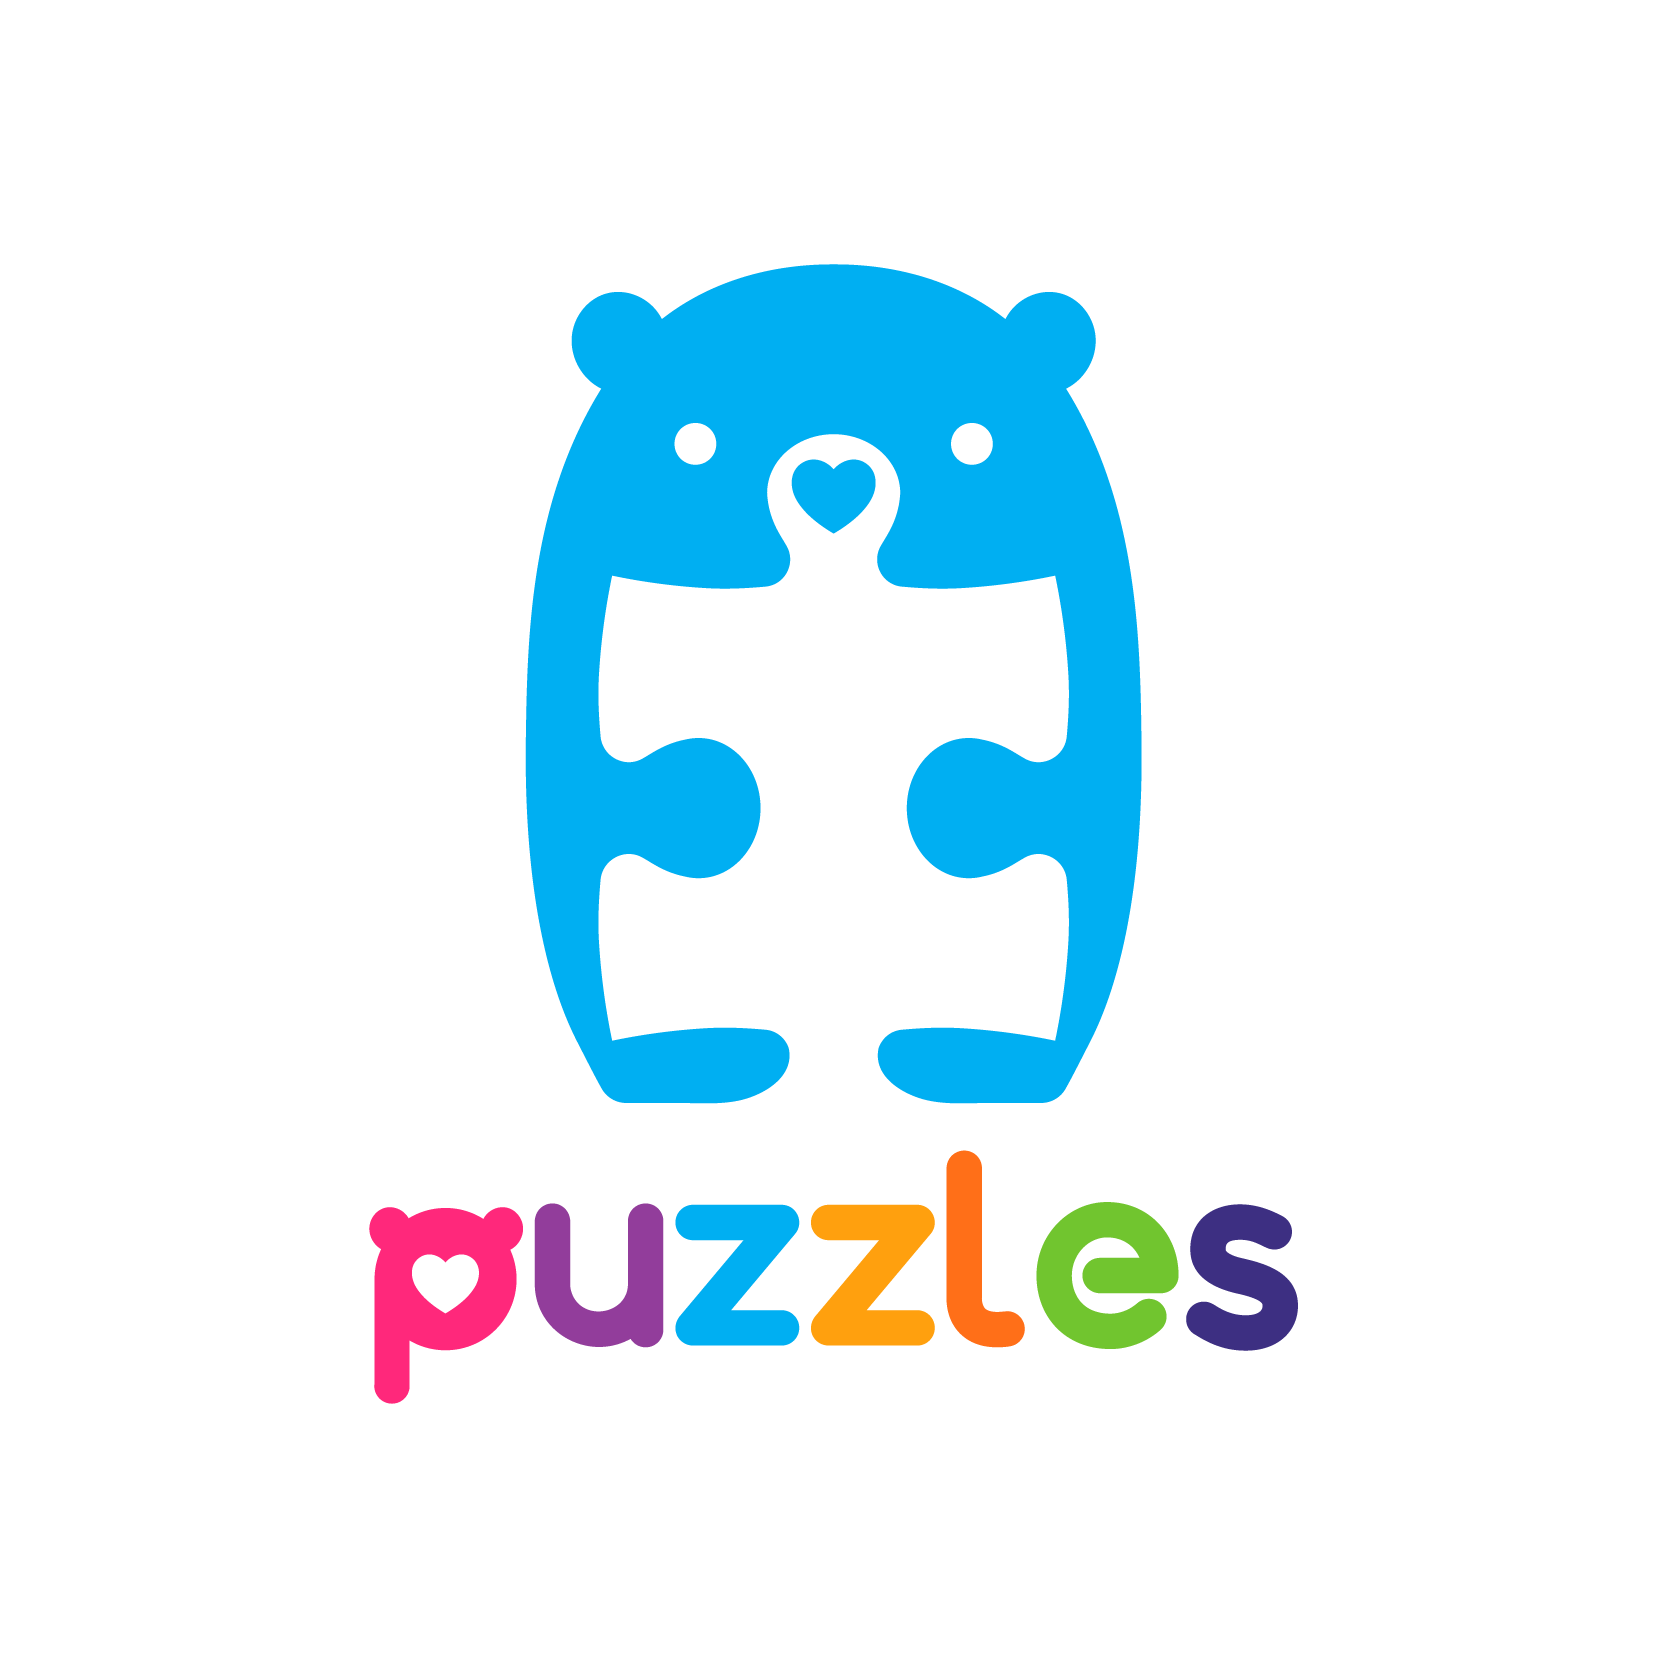 Puzzles Toys